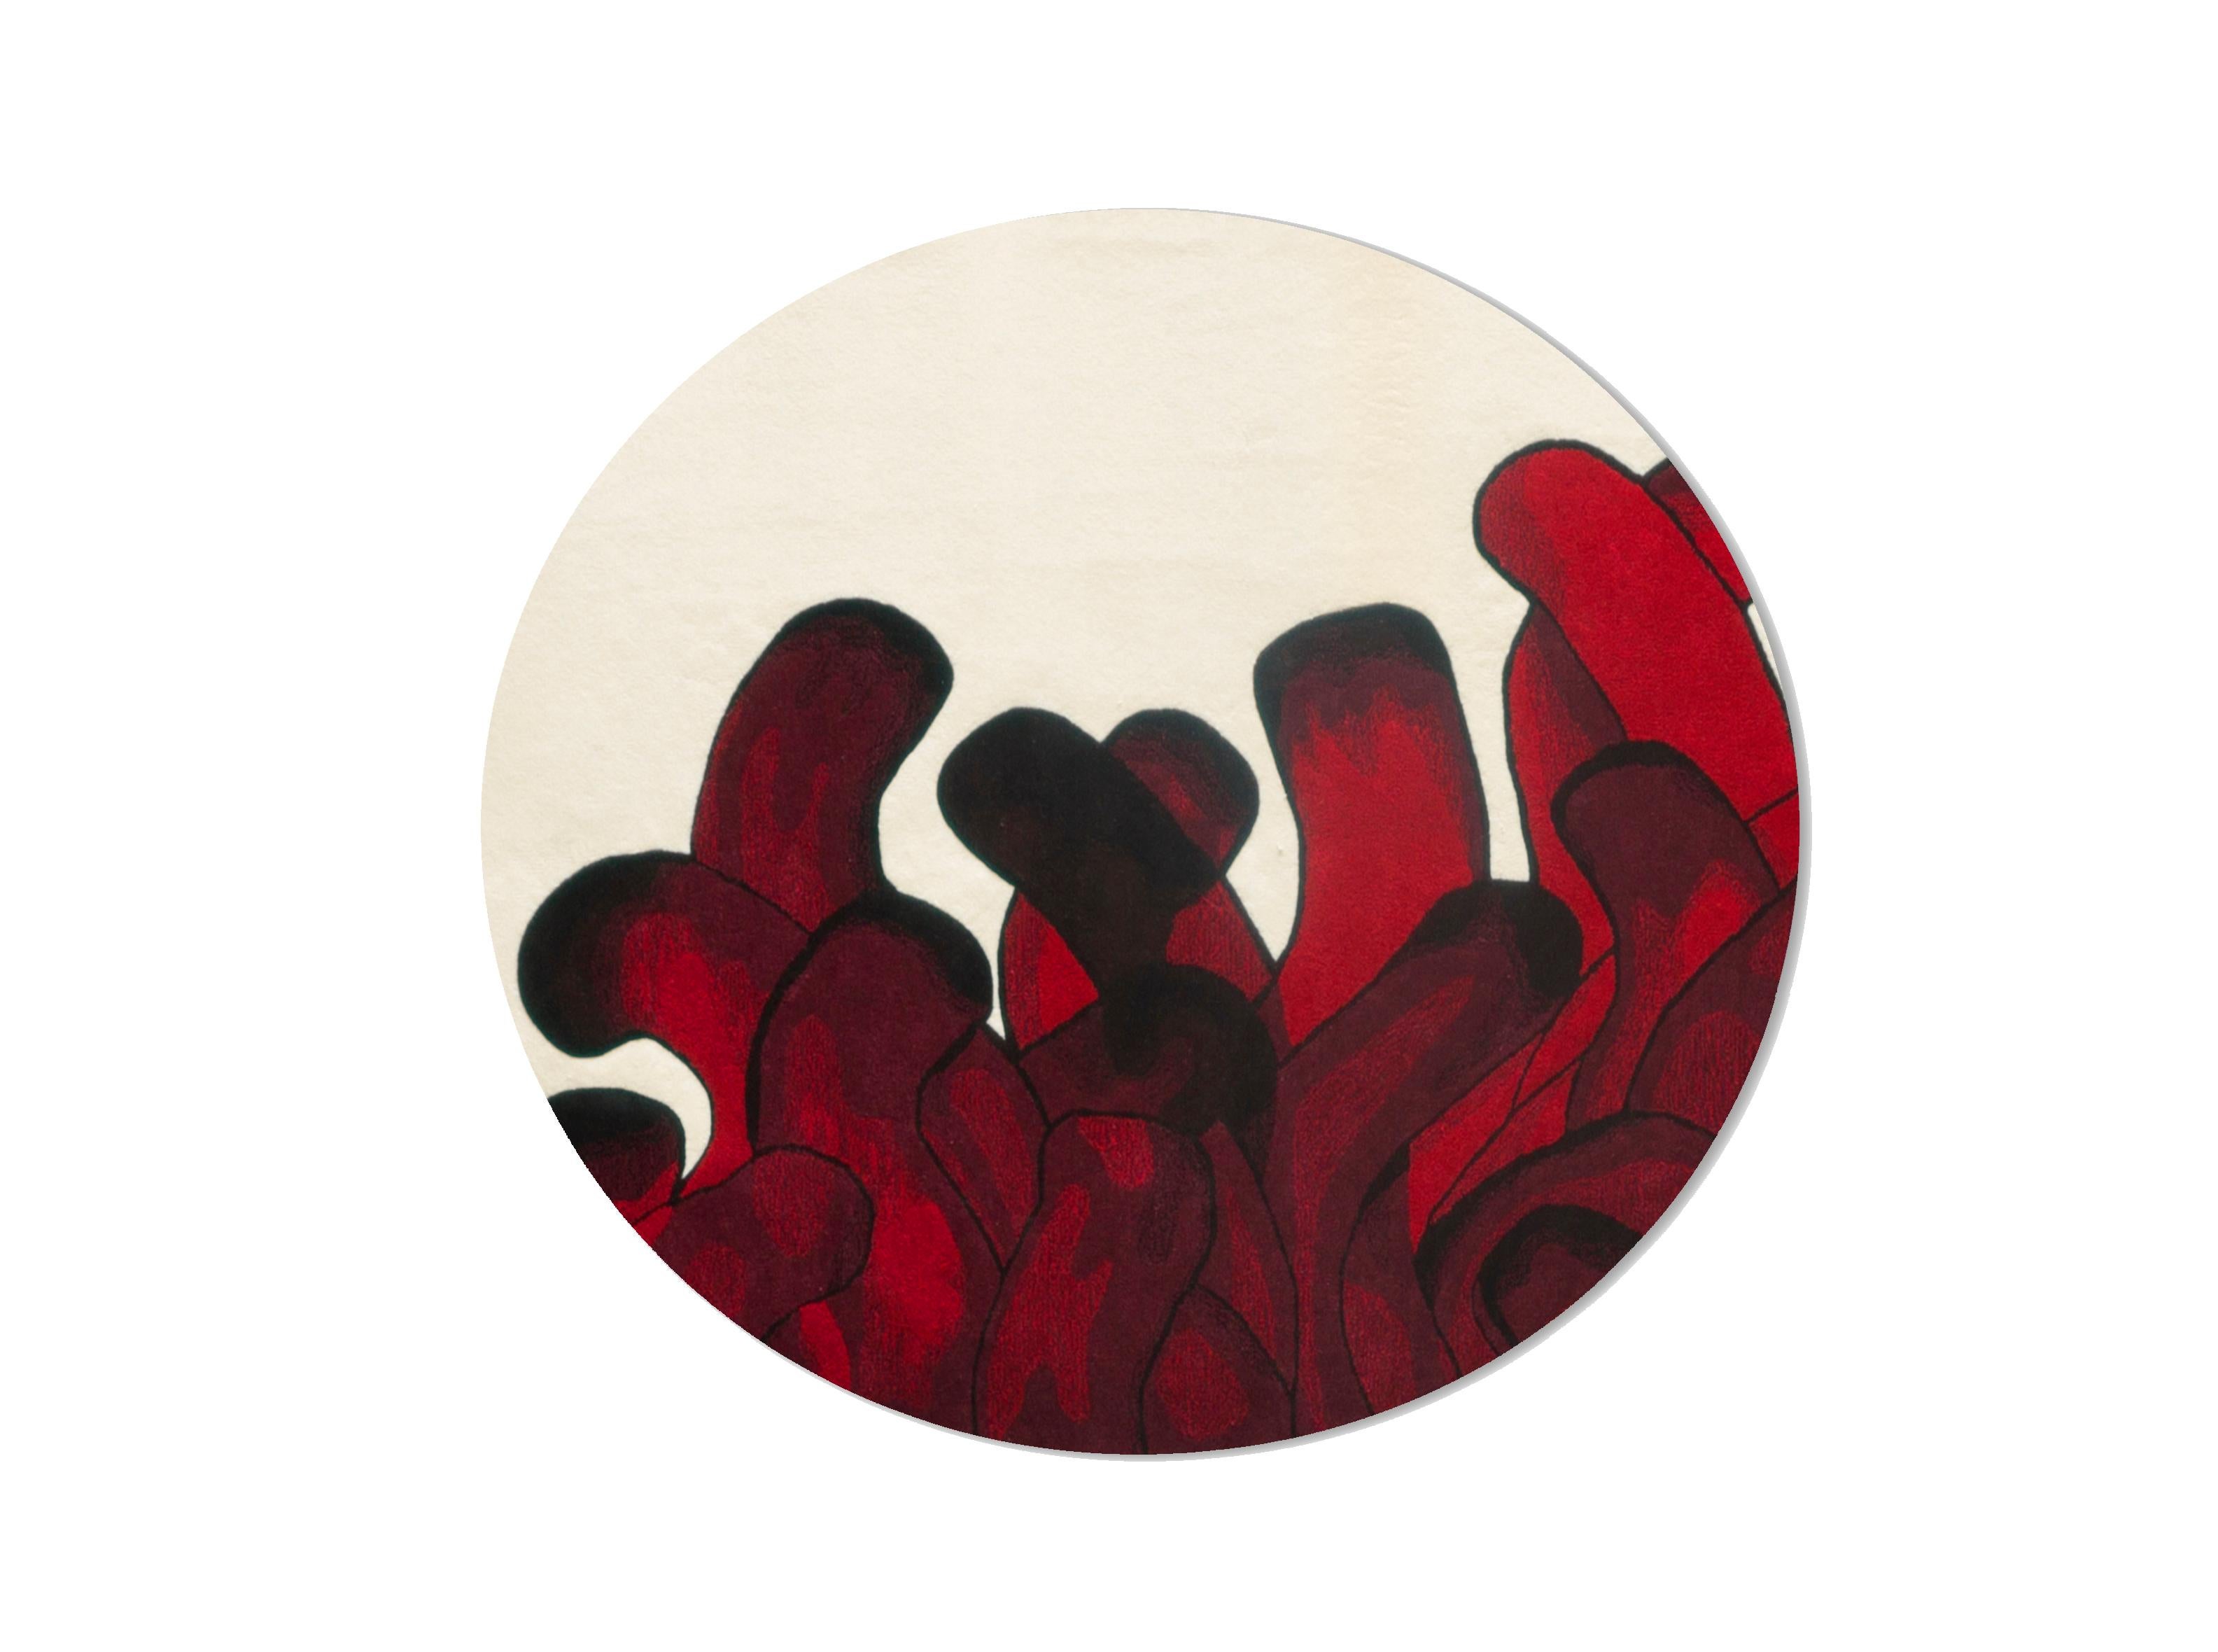 Red Anémone rug François Dumas
Anemone is a rug inspired by a painting in which brushstrokes imitate the movements of sea anemones. The rug is handmade by artisans in Portugal who tuft and cut the wool to obtain a raised design, reproducing the